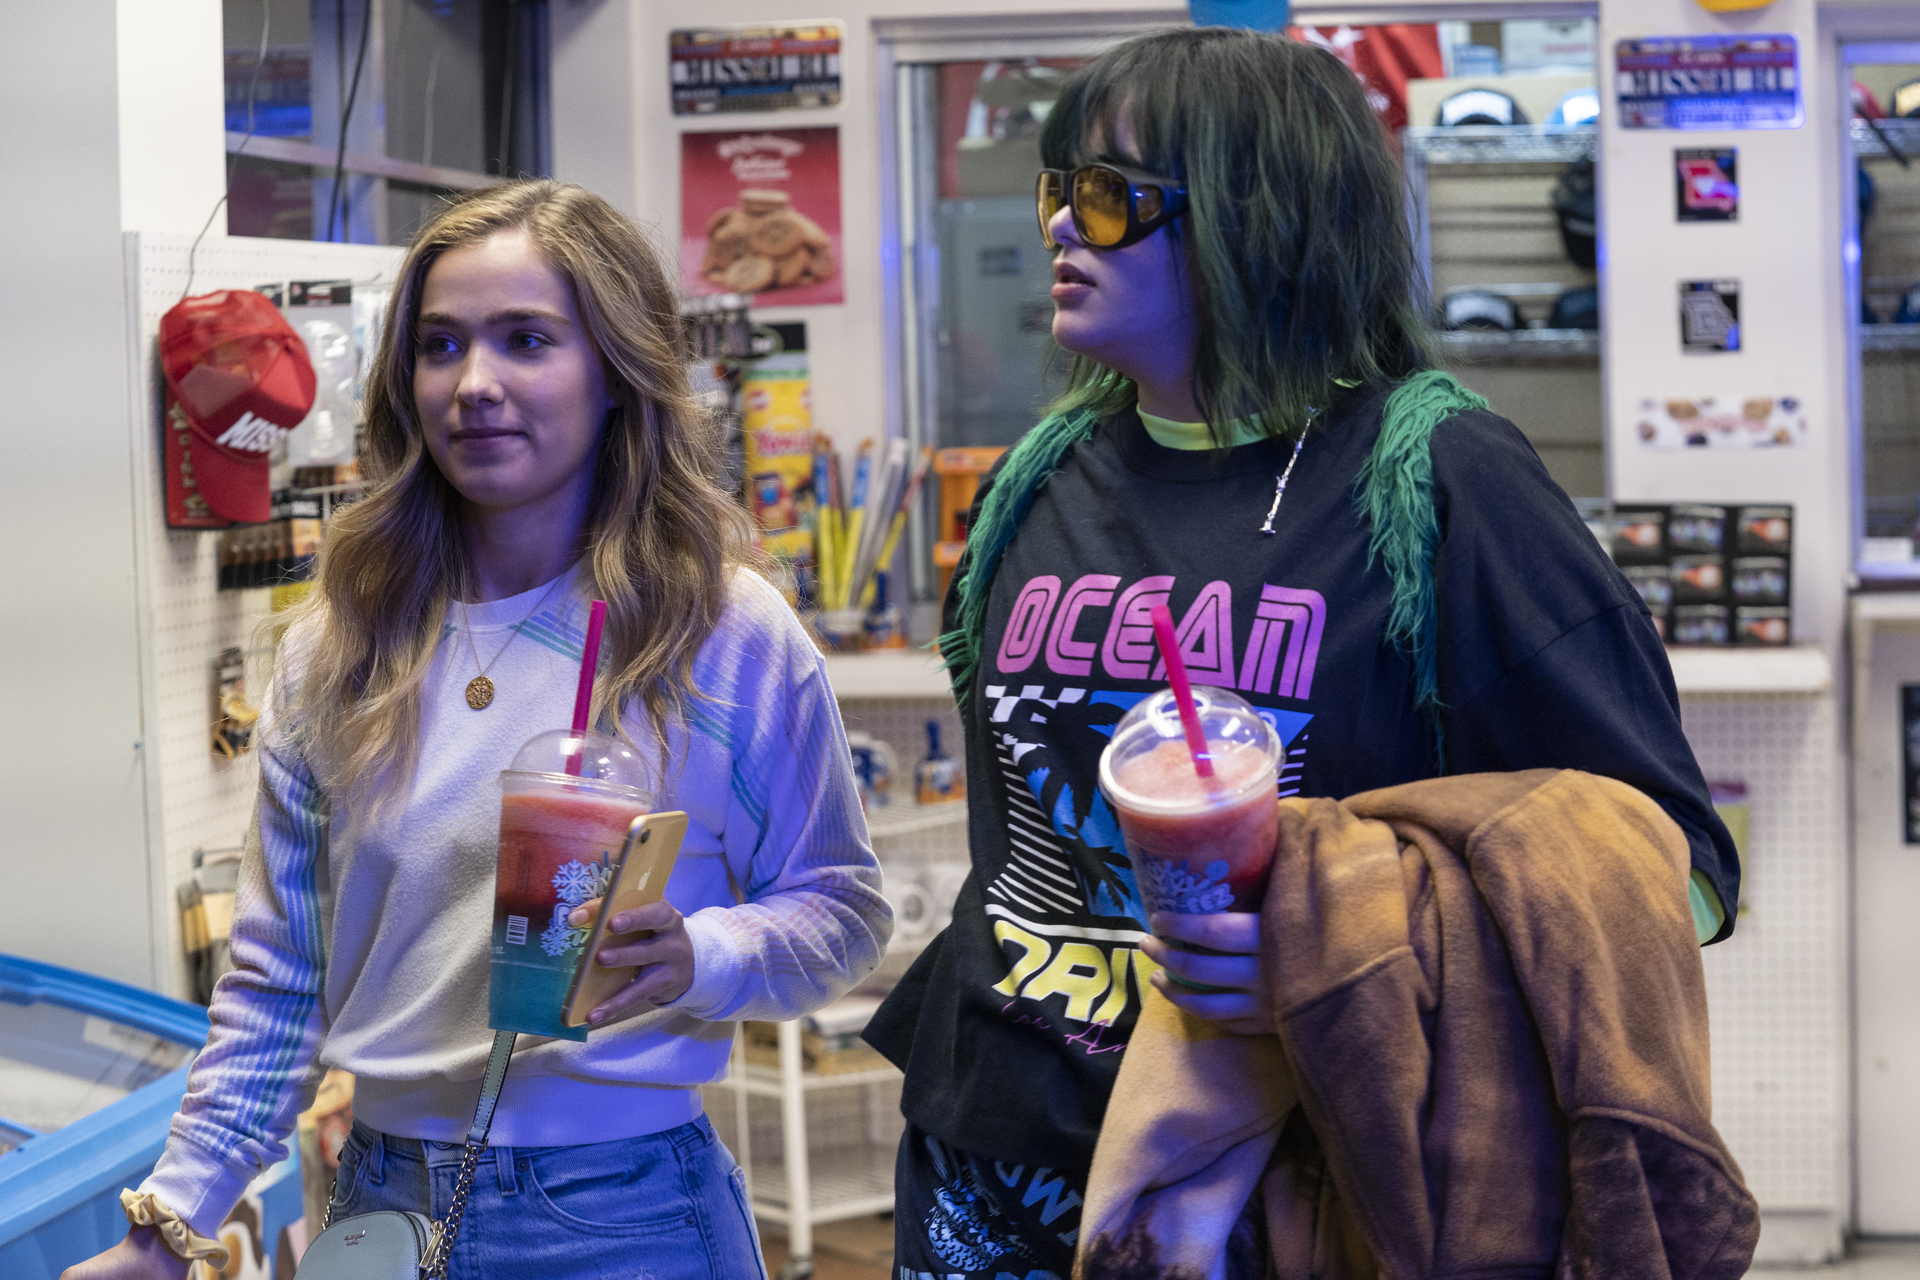 Haley Lu Richardson and Barbie Ferreira journey across state lines for an abortion in 'Unpregnant'